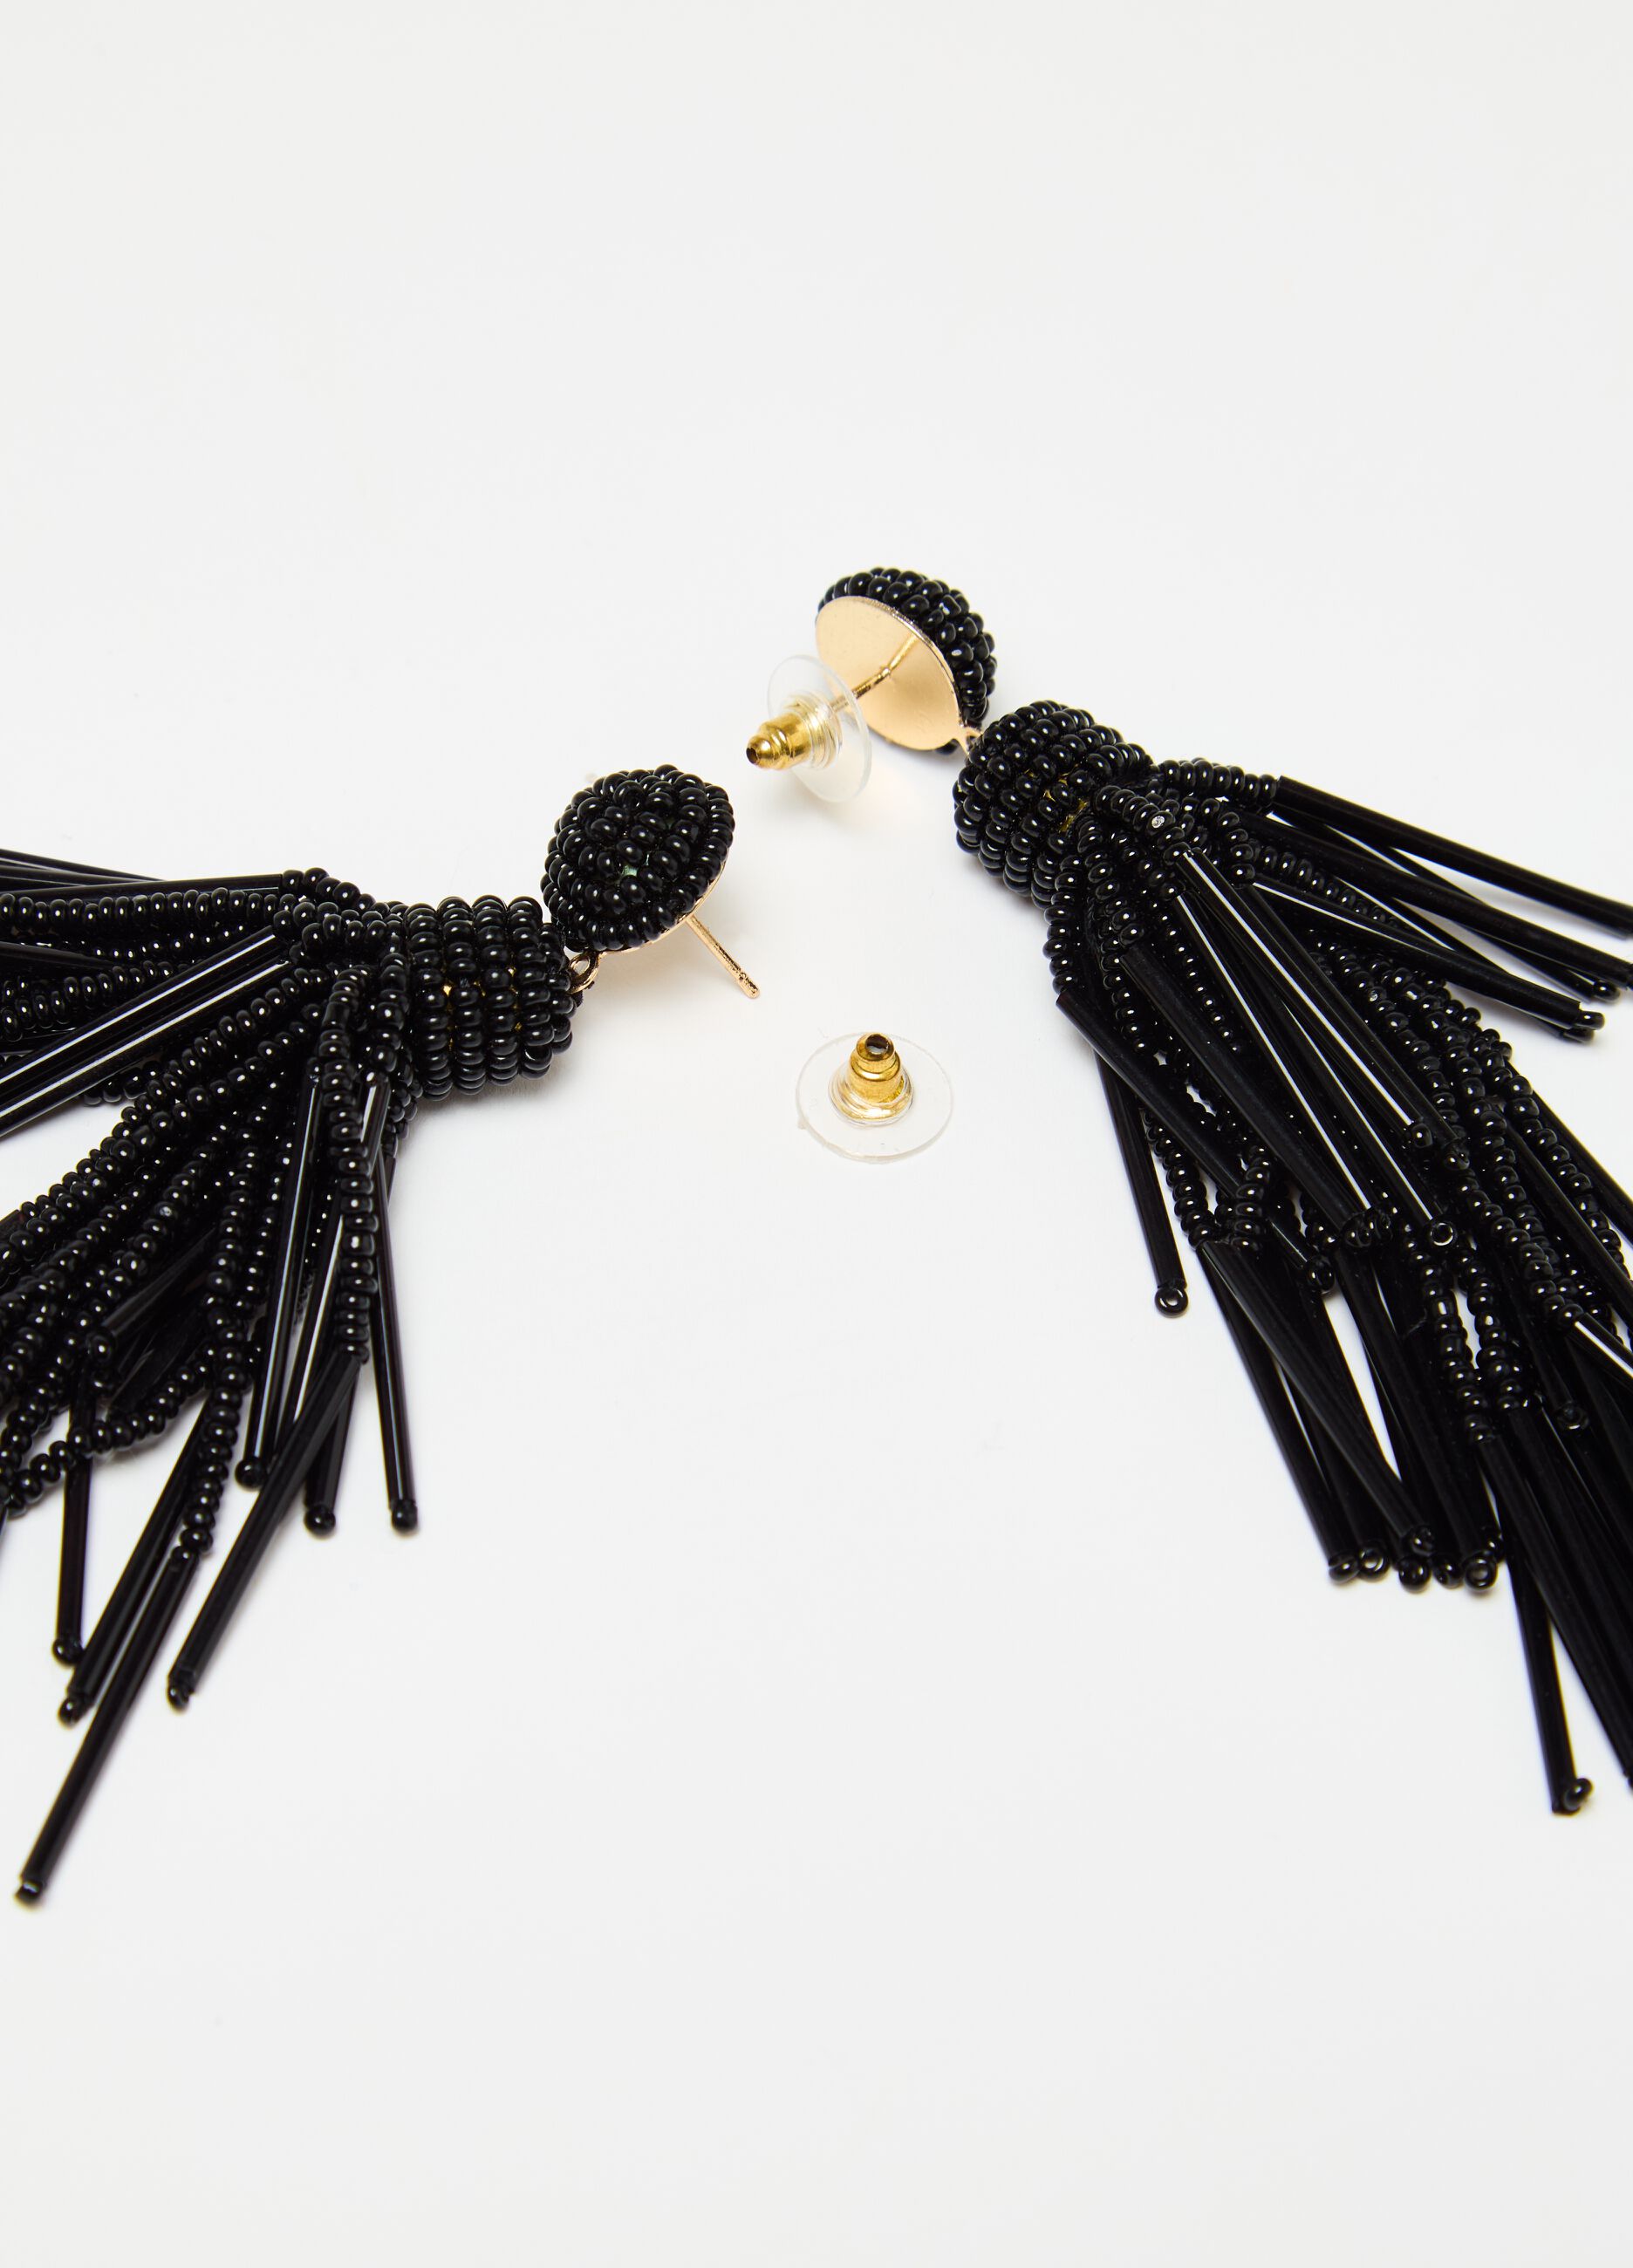 Pendant earrings with beads and fringing